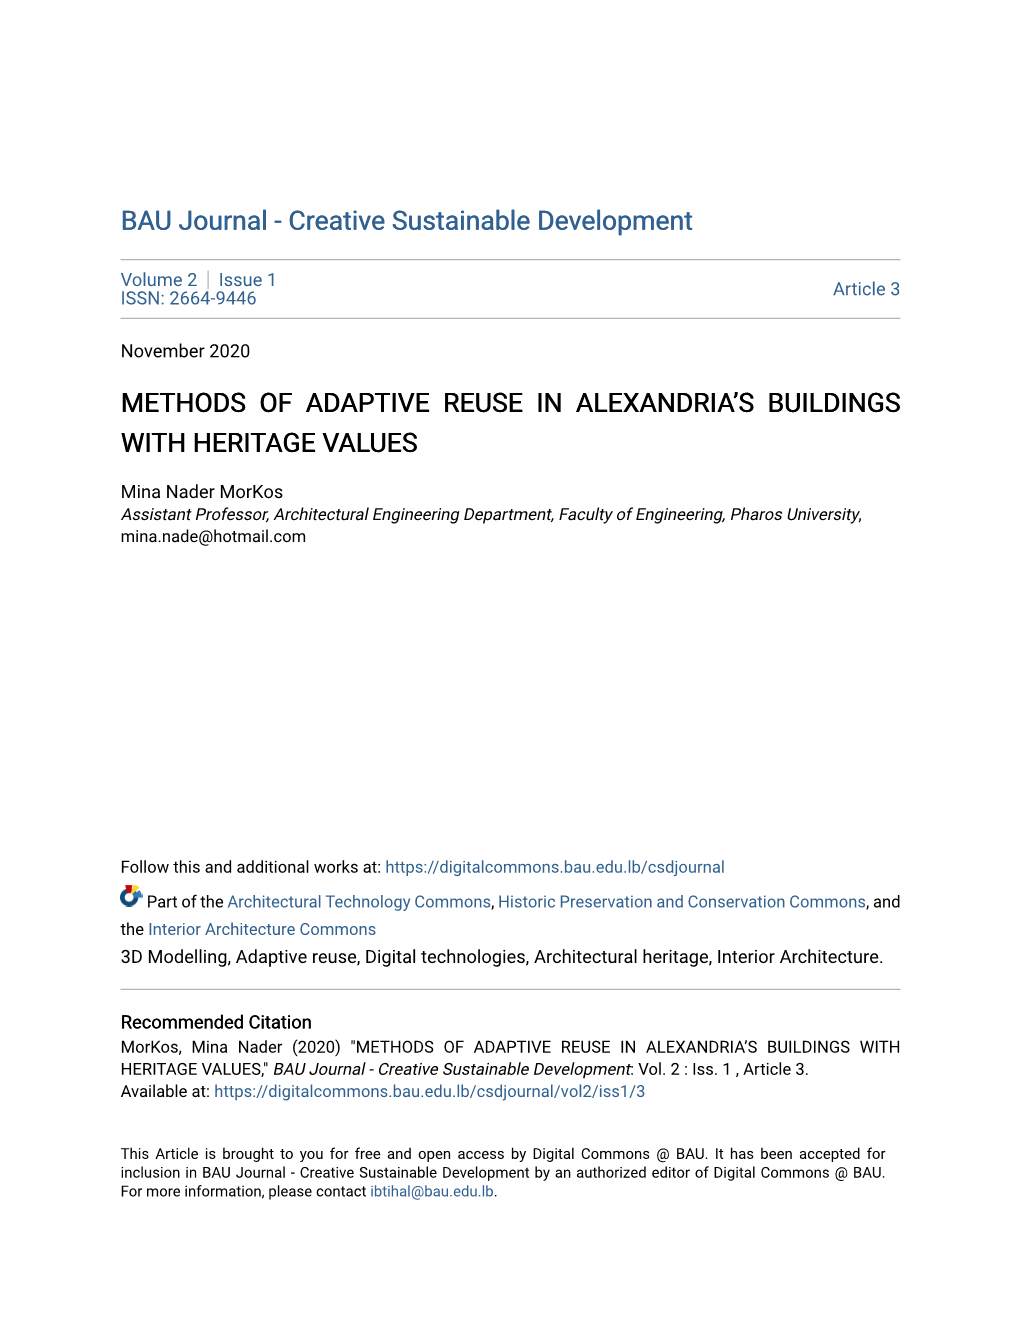 Methods of Adaptive Reuse in Alexandria's Buildings With